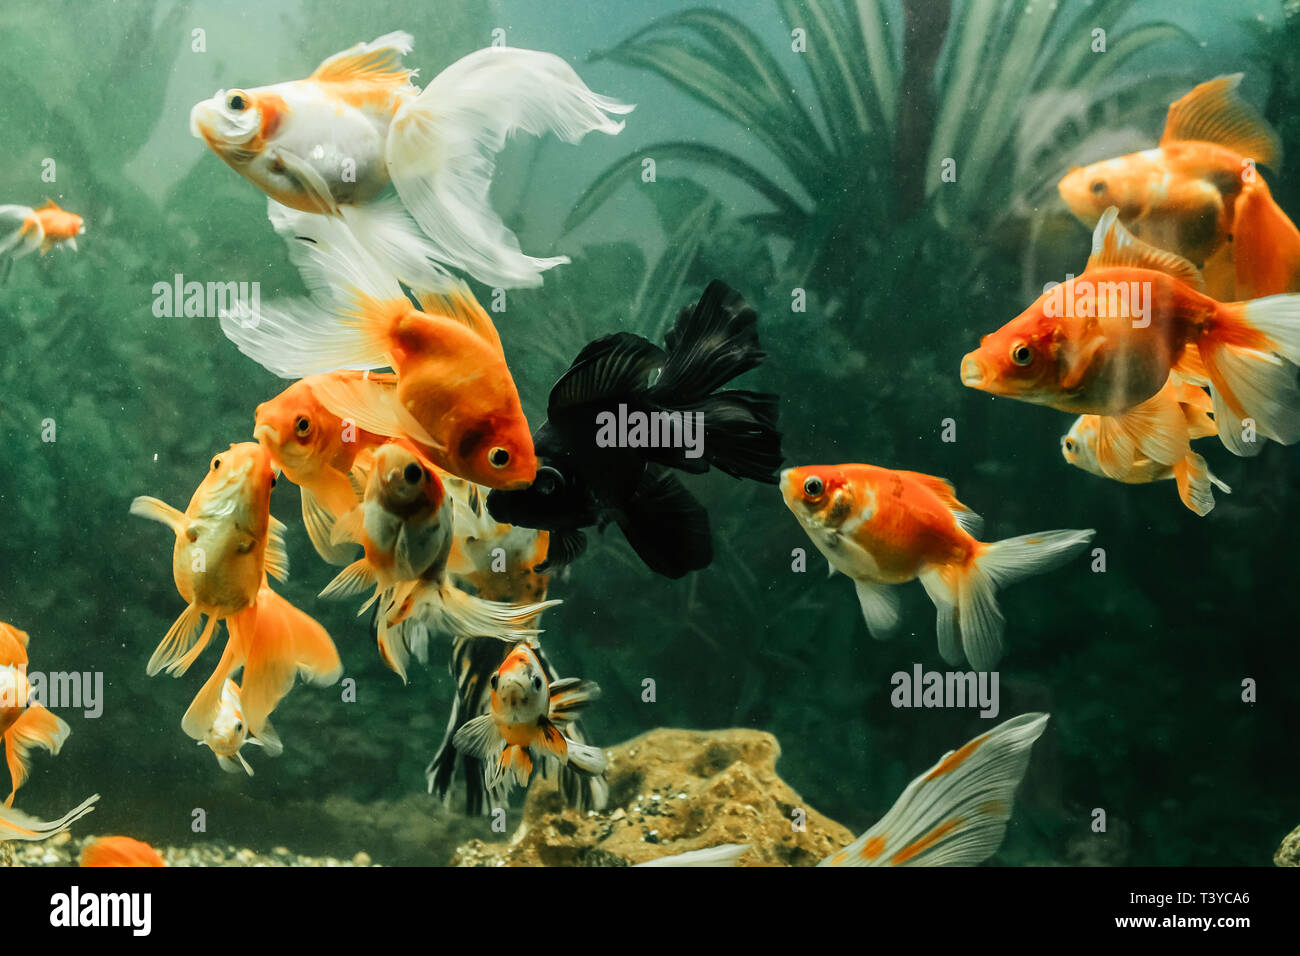 Golden fish of different colors in an aquarium close-up Stock Photo - Alamy